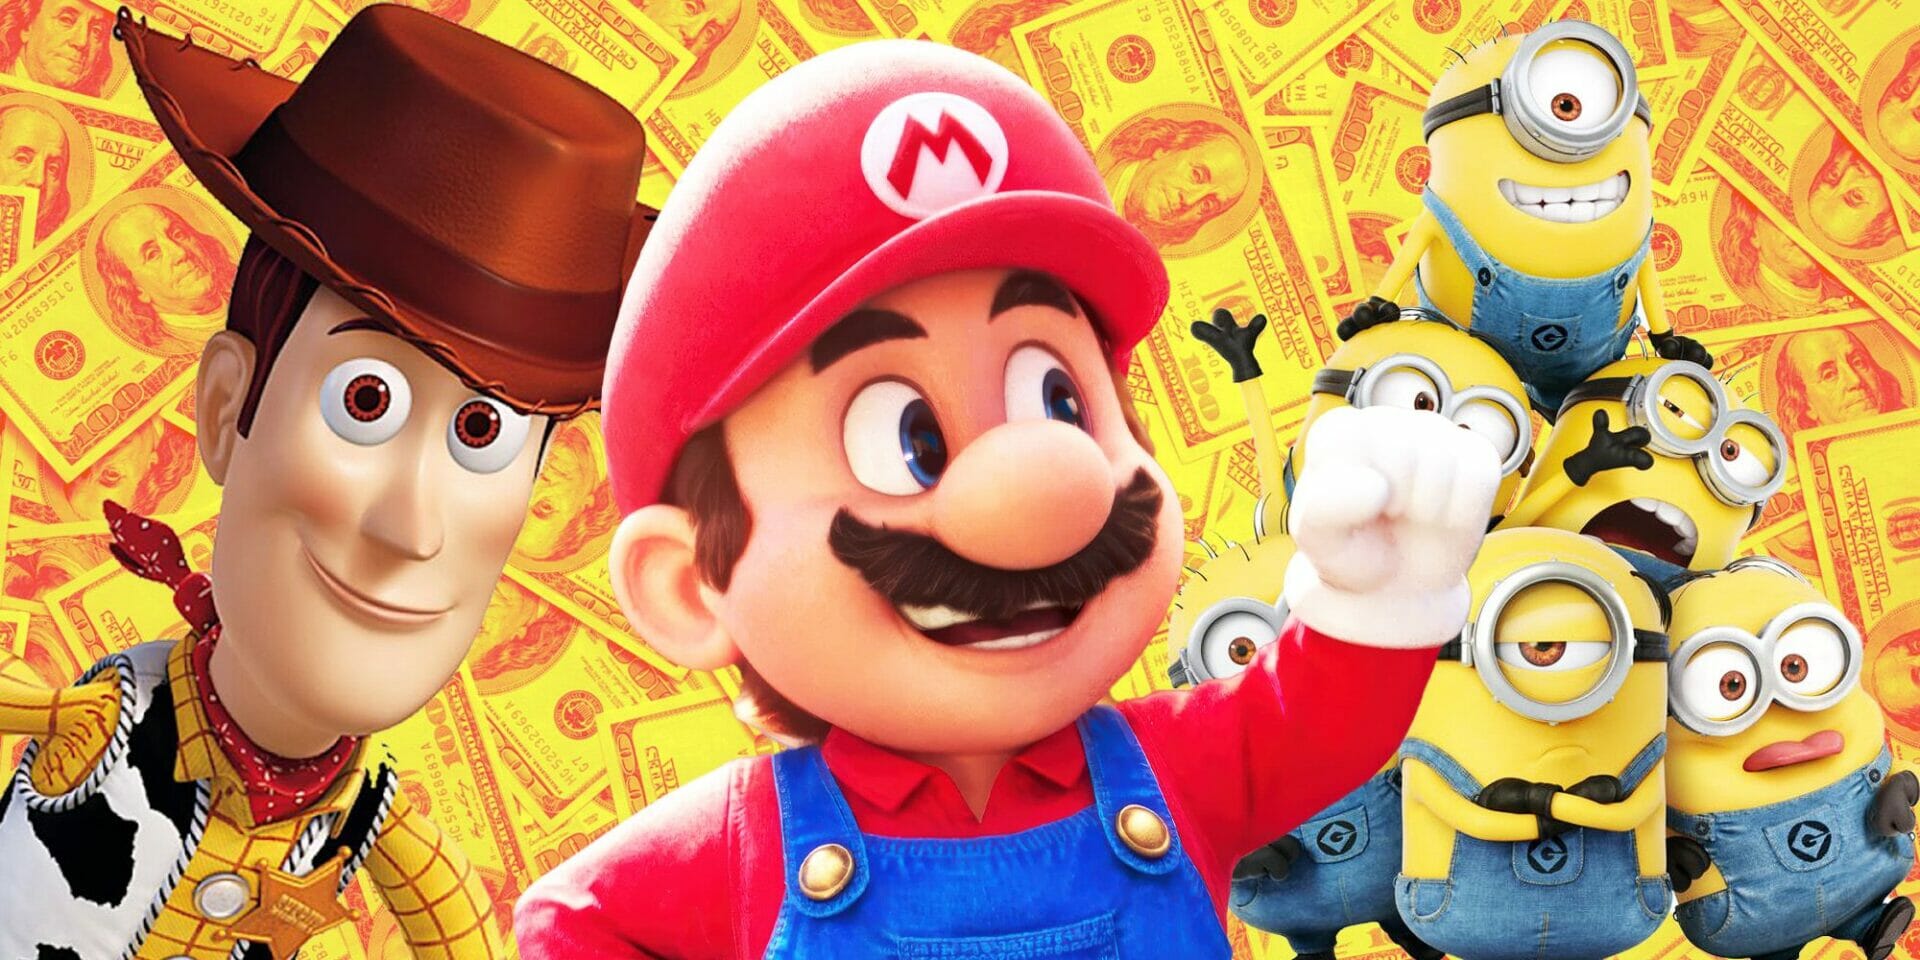 Super Mario & All 9 Other Animated Movies That Grossed Over $1 Billion